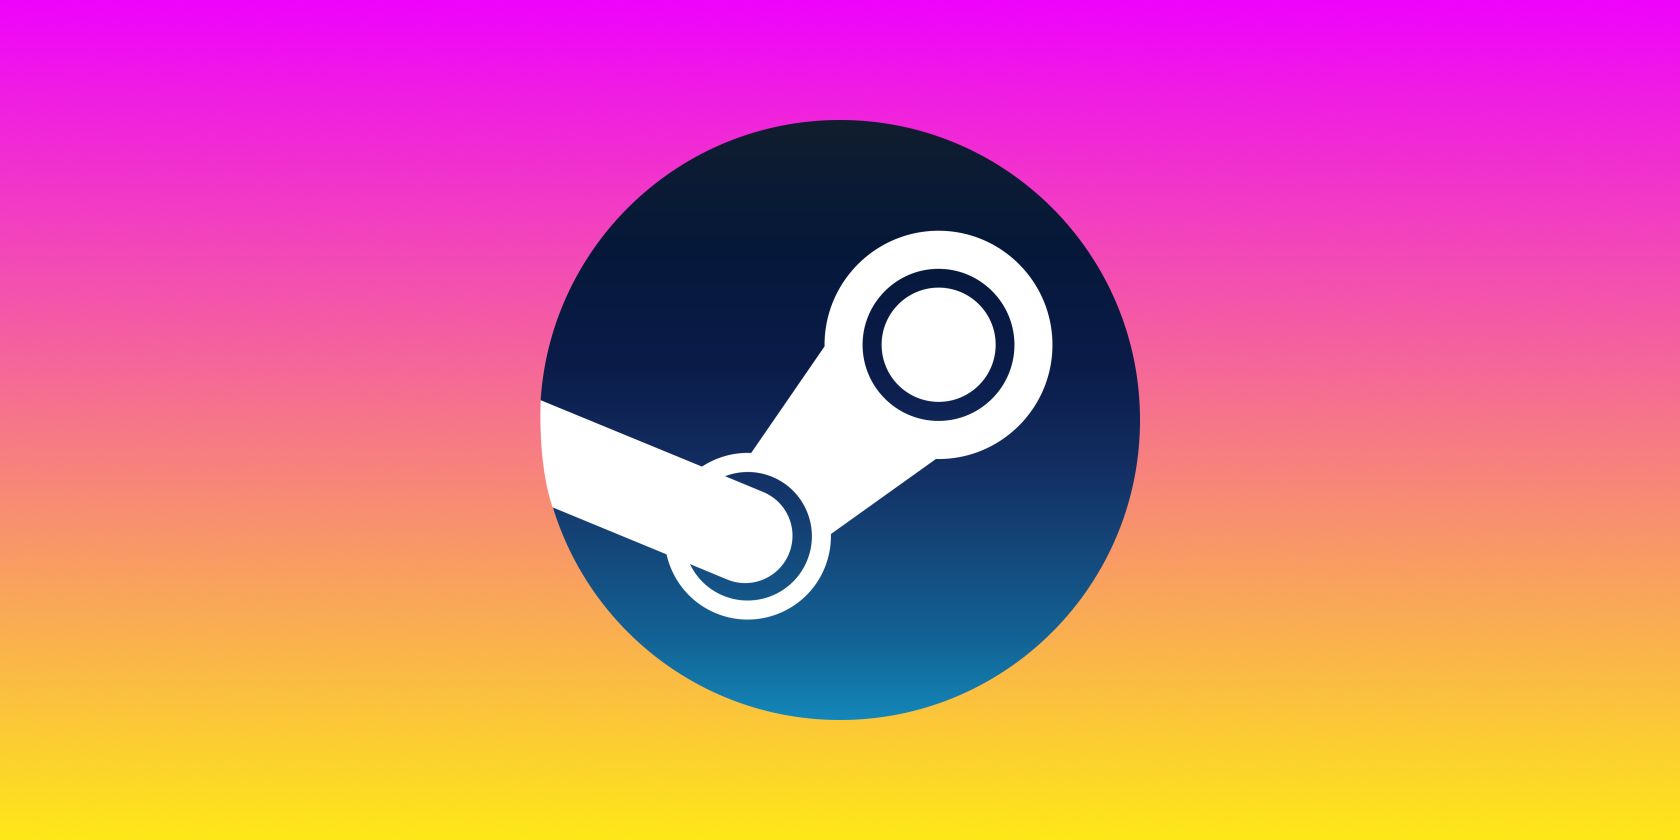 steam logo on colored background